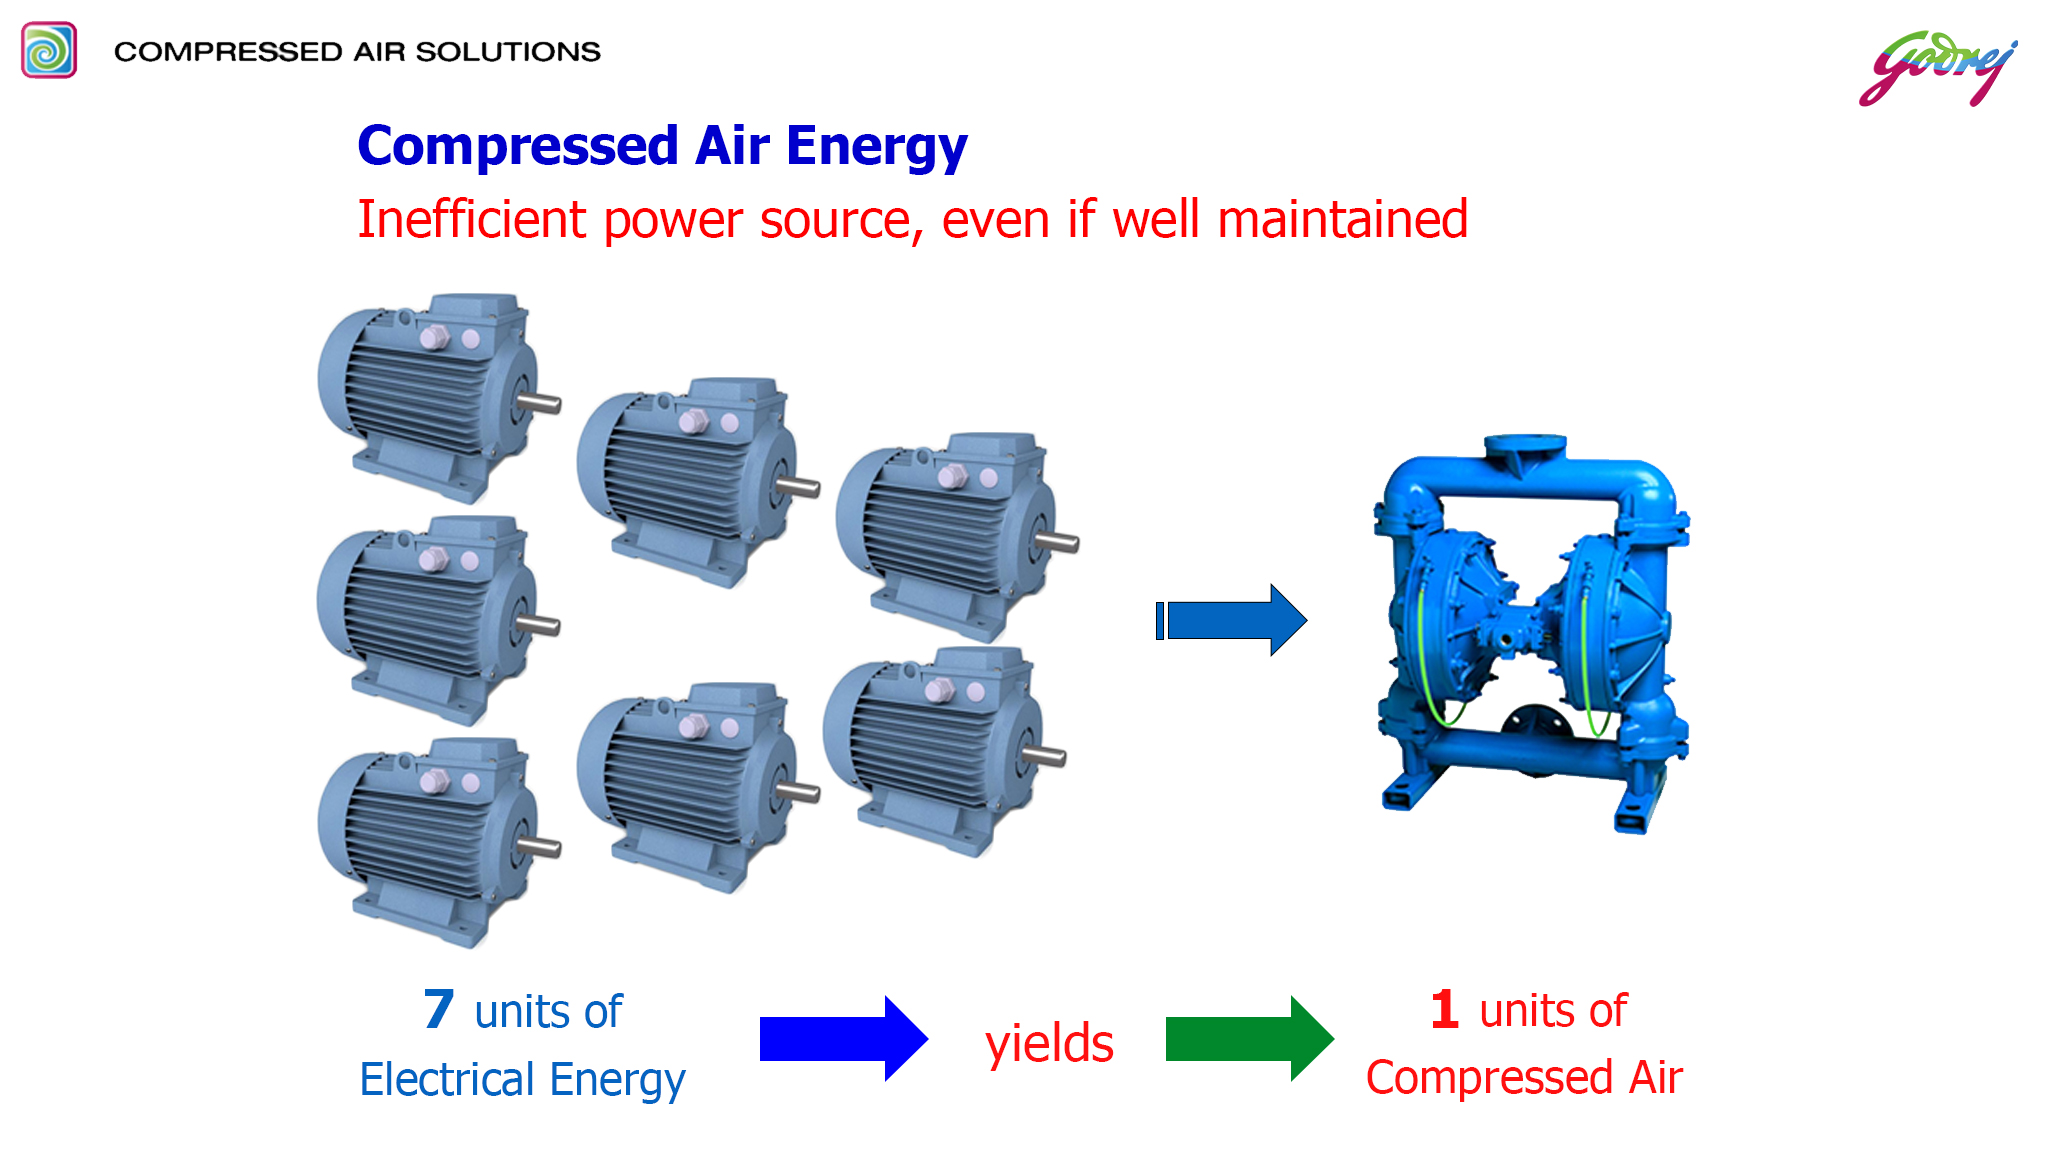 compressed-air-energy-ENERGY SAVING SOLUTIONS IN COMPRESSED AIR NETWORK (GODREJ)